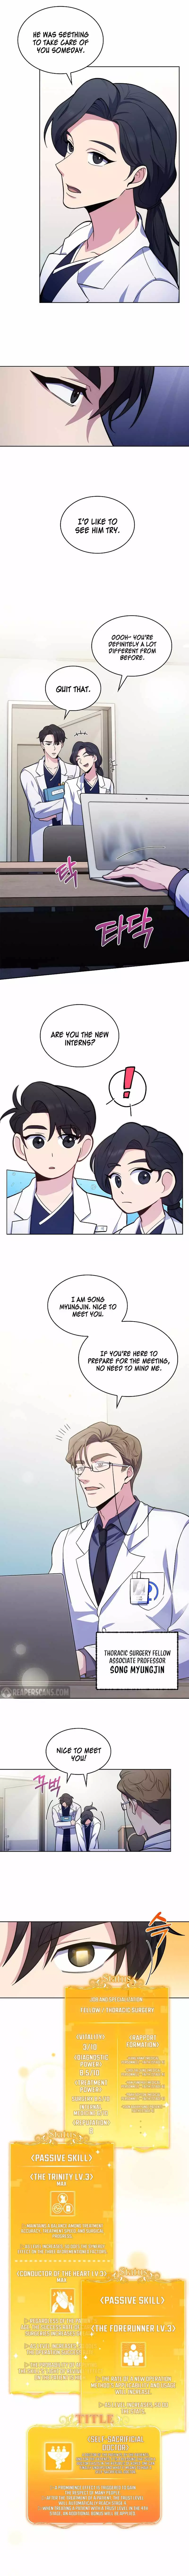 Level-Up Doctor (Manhwa) - 25 page 4-4c1cac72